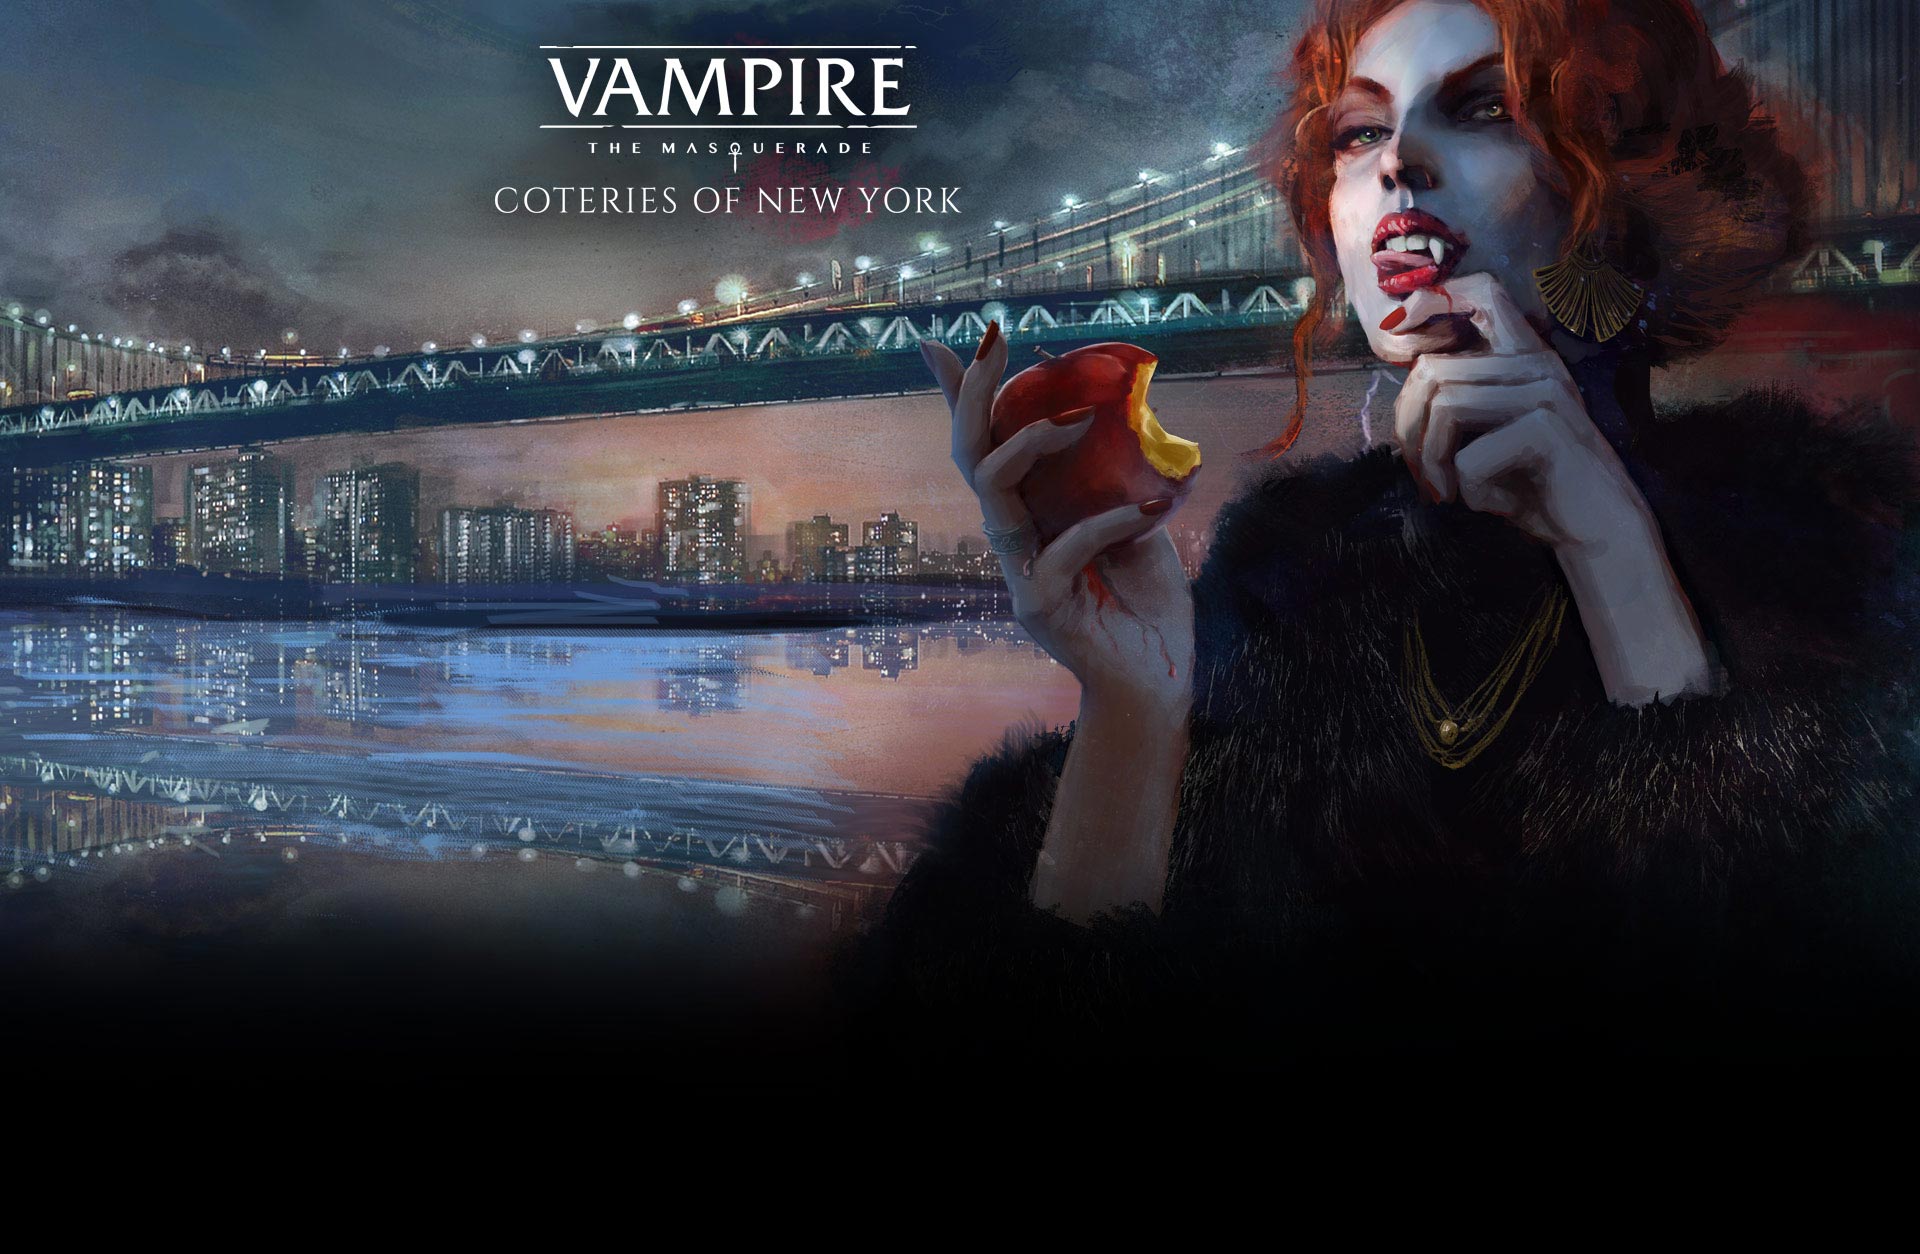 Vampire: The Masquerade – Swansong download the last version for windows